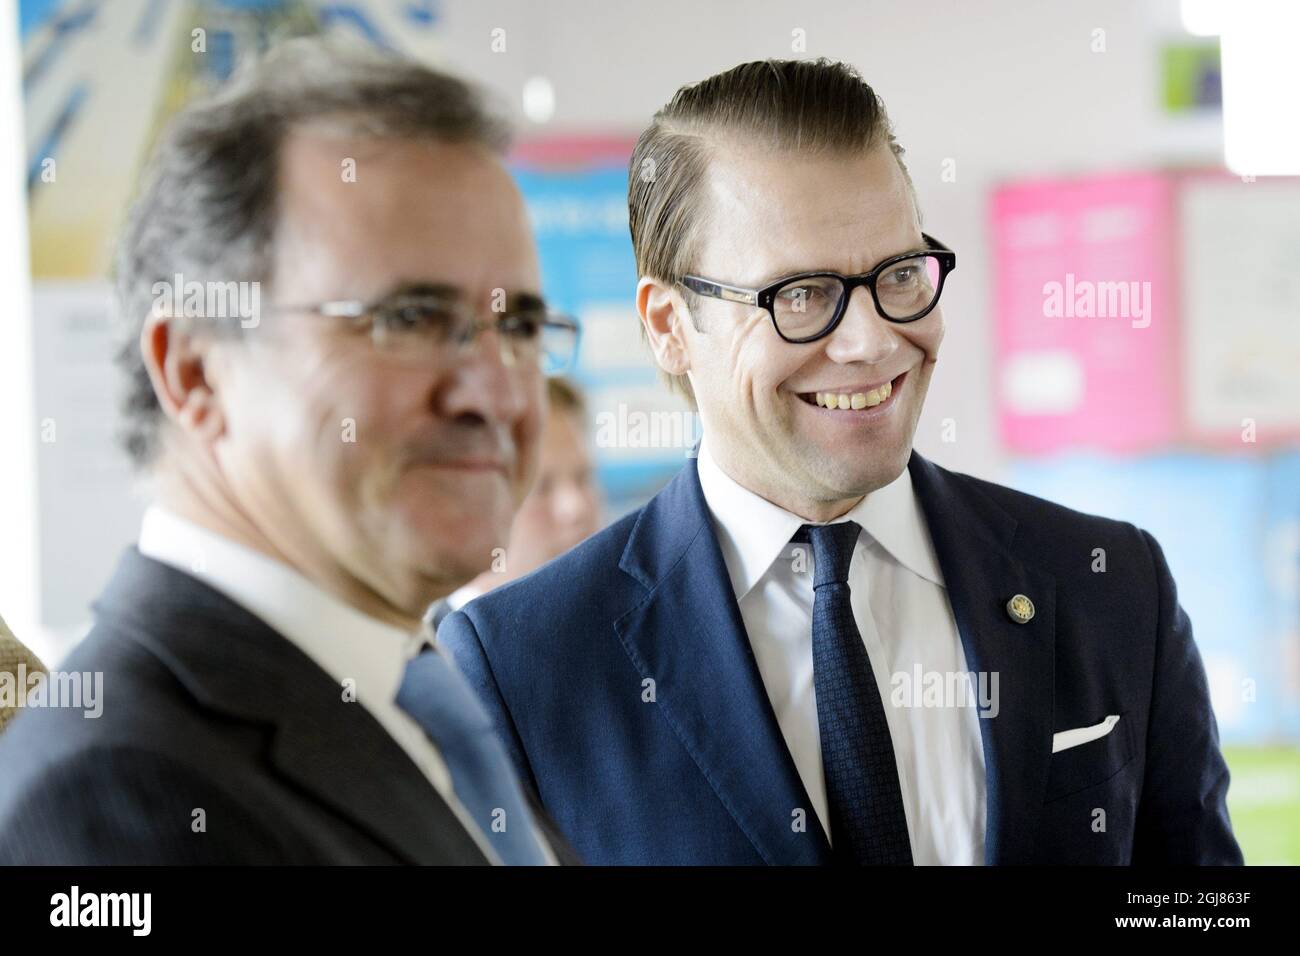 LUND 2013-10-03 Prince Daniel is seen during a visit to Ideon Gateway in Lund, Sweden, October 3, 2013. The Crown Princess couple accompanied Portugal's President Anibal Cavaco Silva and his wife Maria get an insight into how to build a brand new district for world-leading research and innovation. The President of Portugal is on a State visit to Sweden. Foto: Ludvig Thunman / TT / Kod 10600  Stock Photo